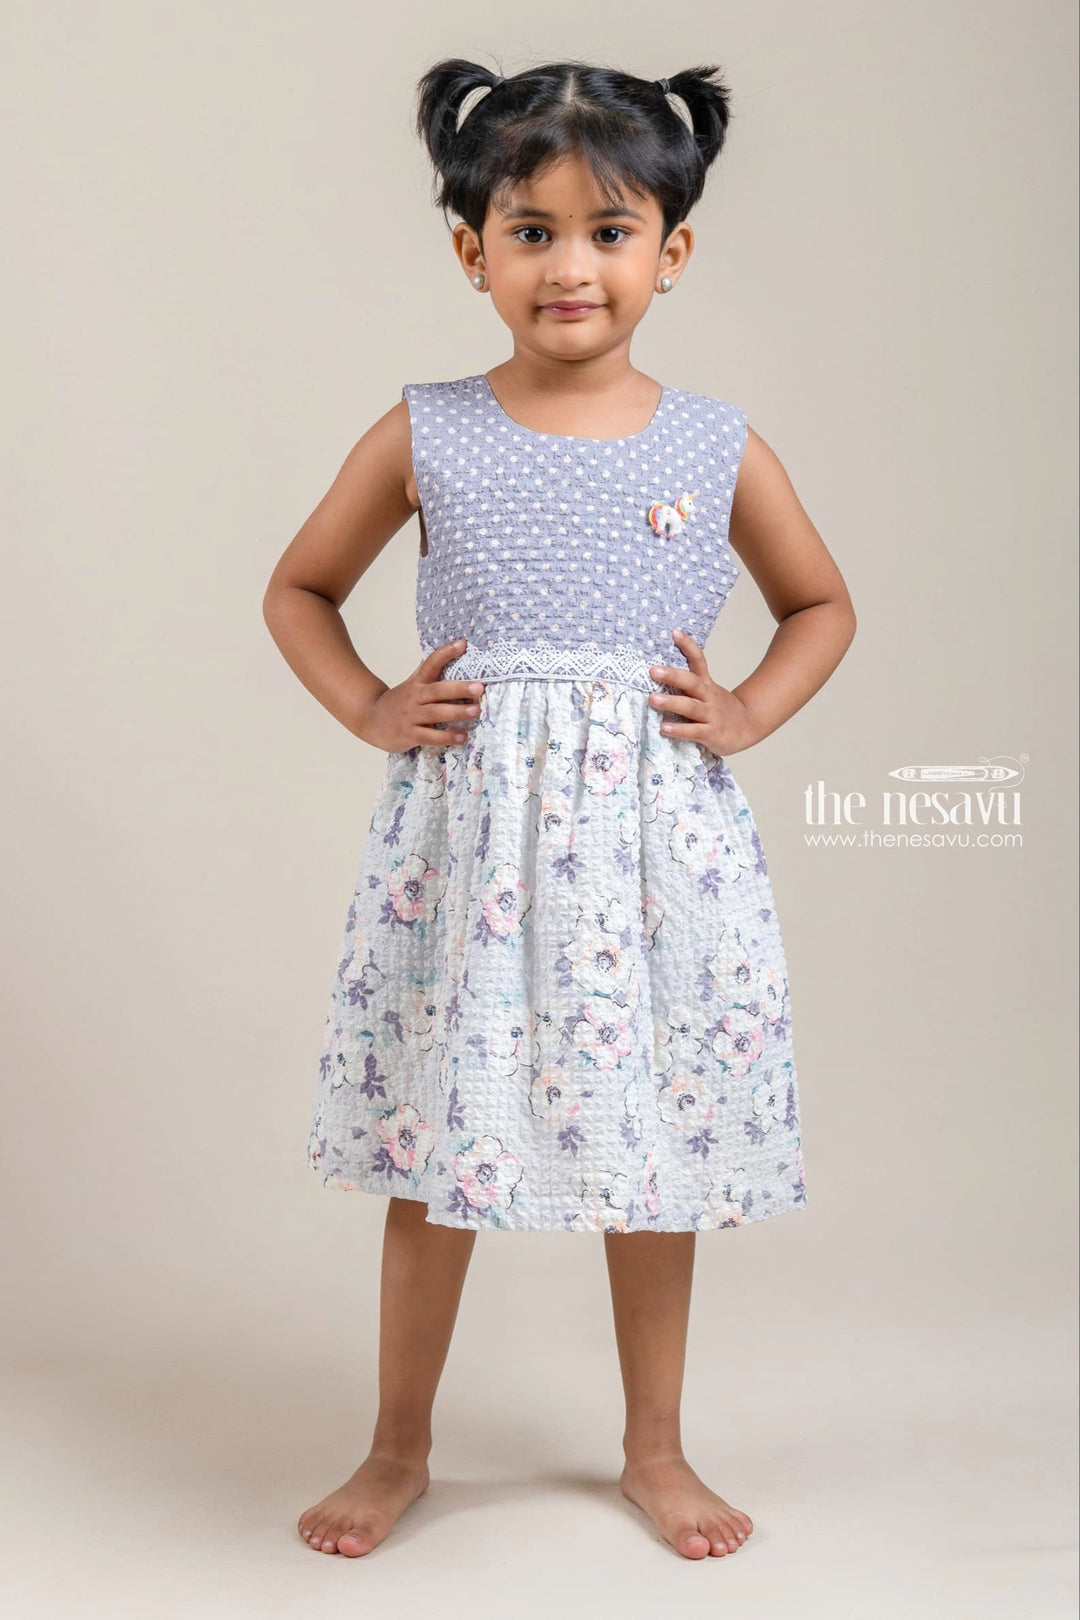 The Nesavu Baby Fancy Frock Gorgeous Dot Printed Gray Yoke With Floral Printed White Frock For baby Girls Nesavu 14 (6M) / Gray / Cotton Blend BFJ396B-14 Stunning Frock Suit Design | Premium Casual Wear | The Nesavu